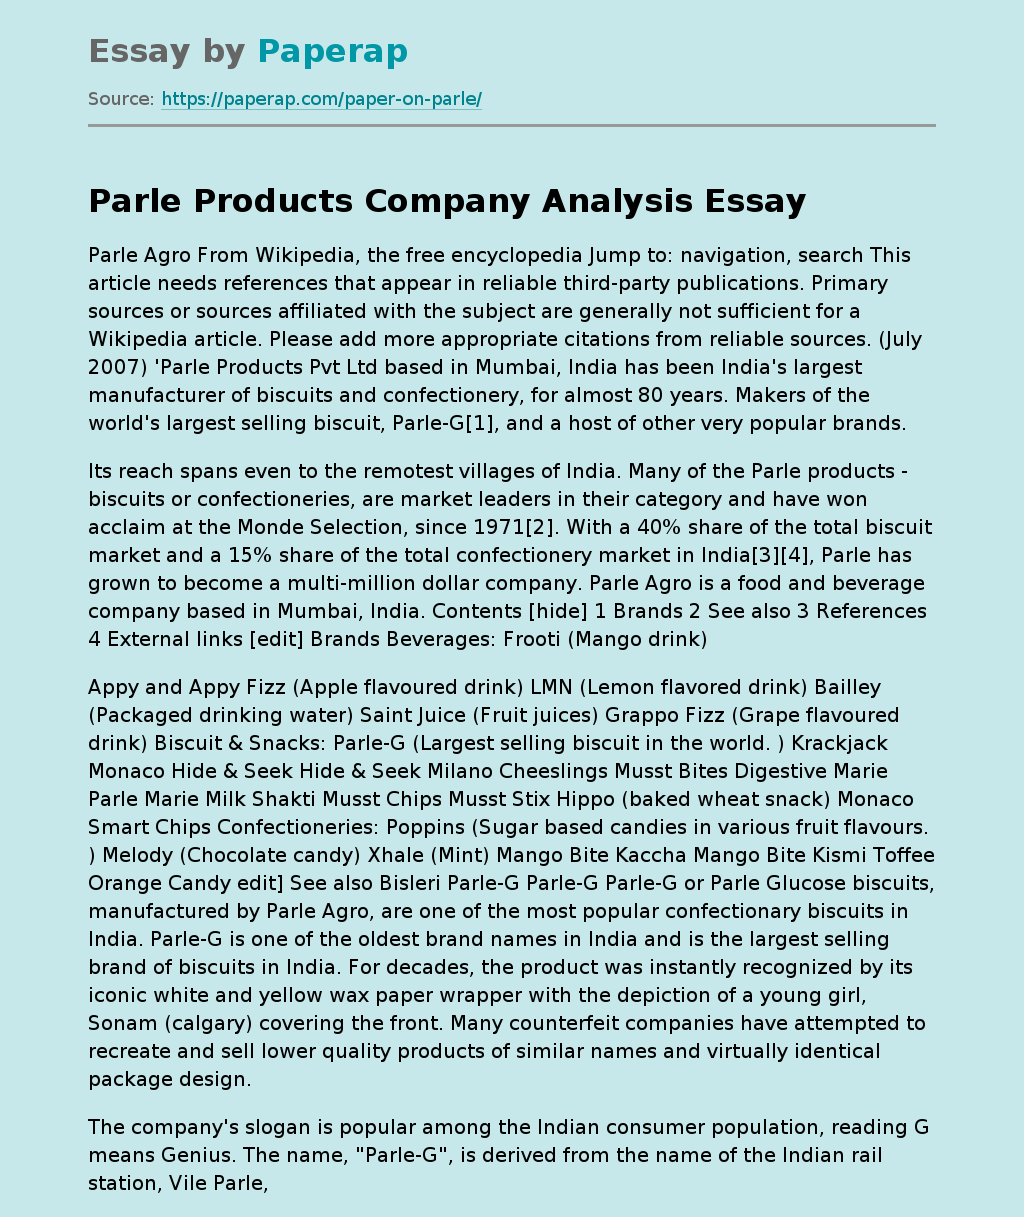 Parle Products Company Analysis